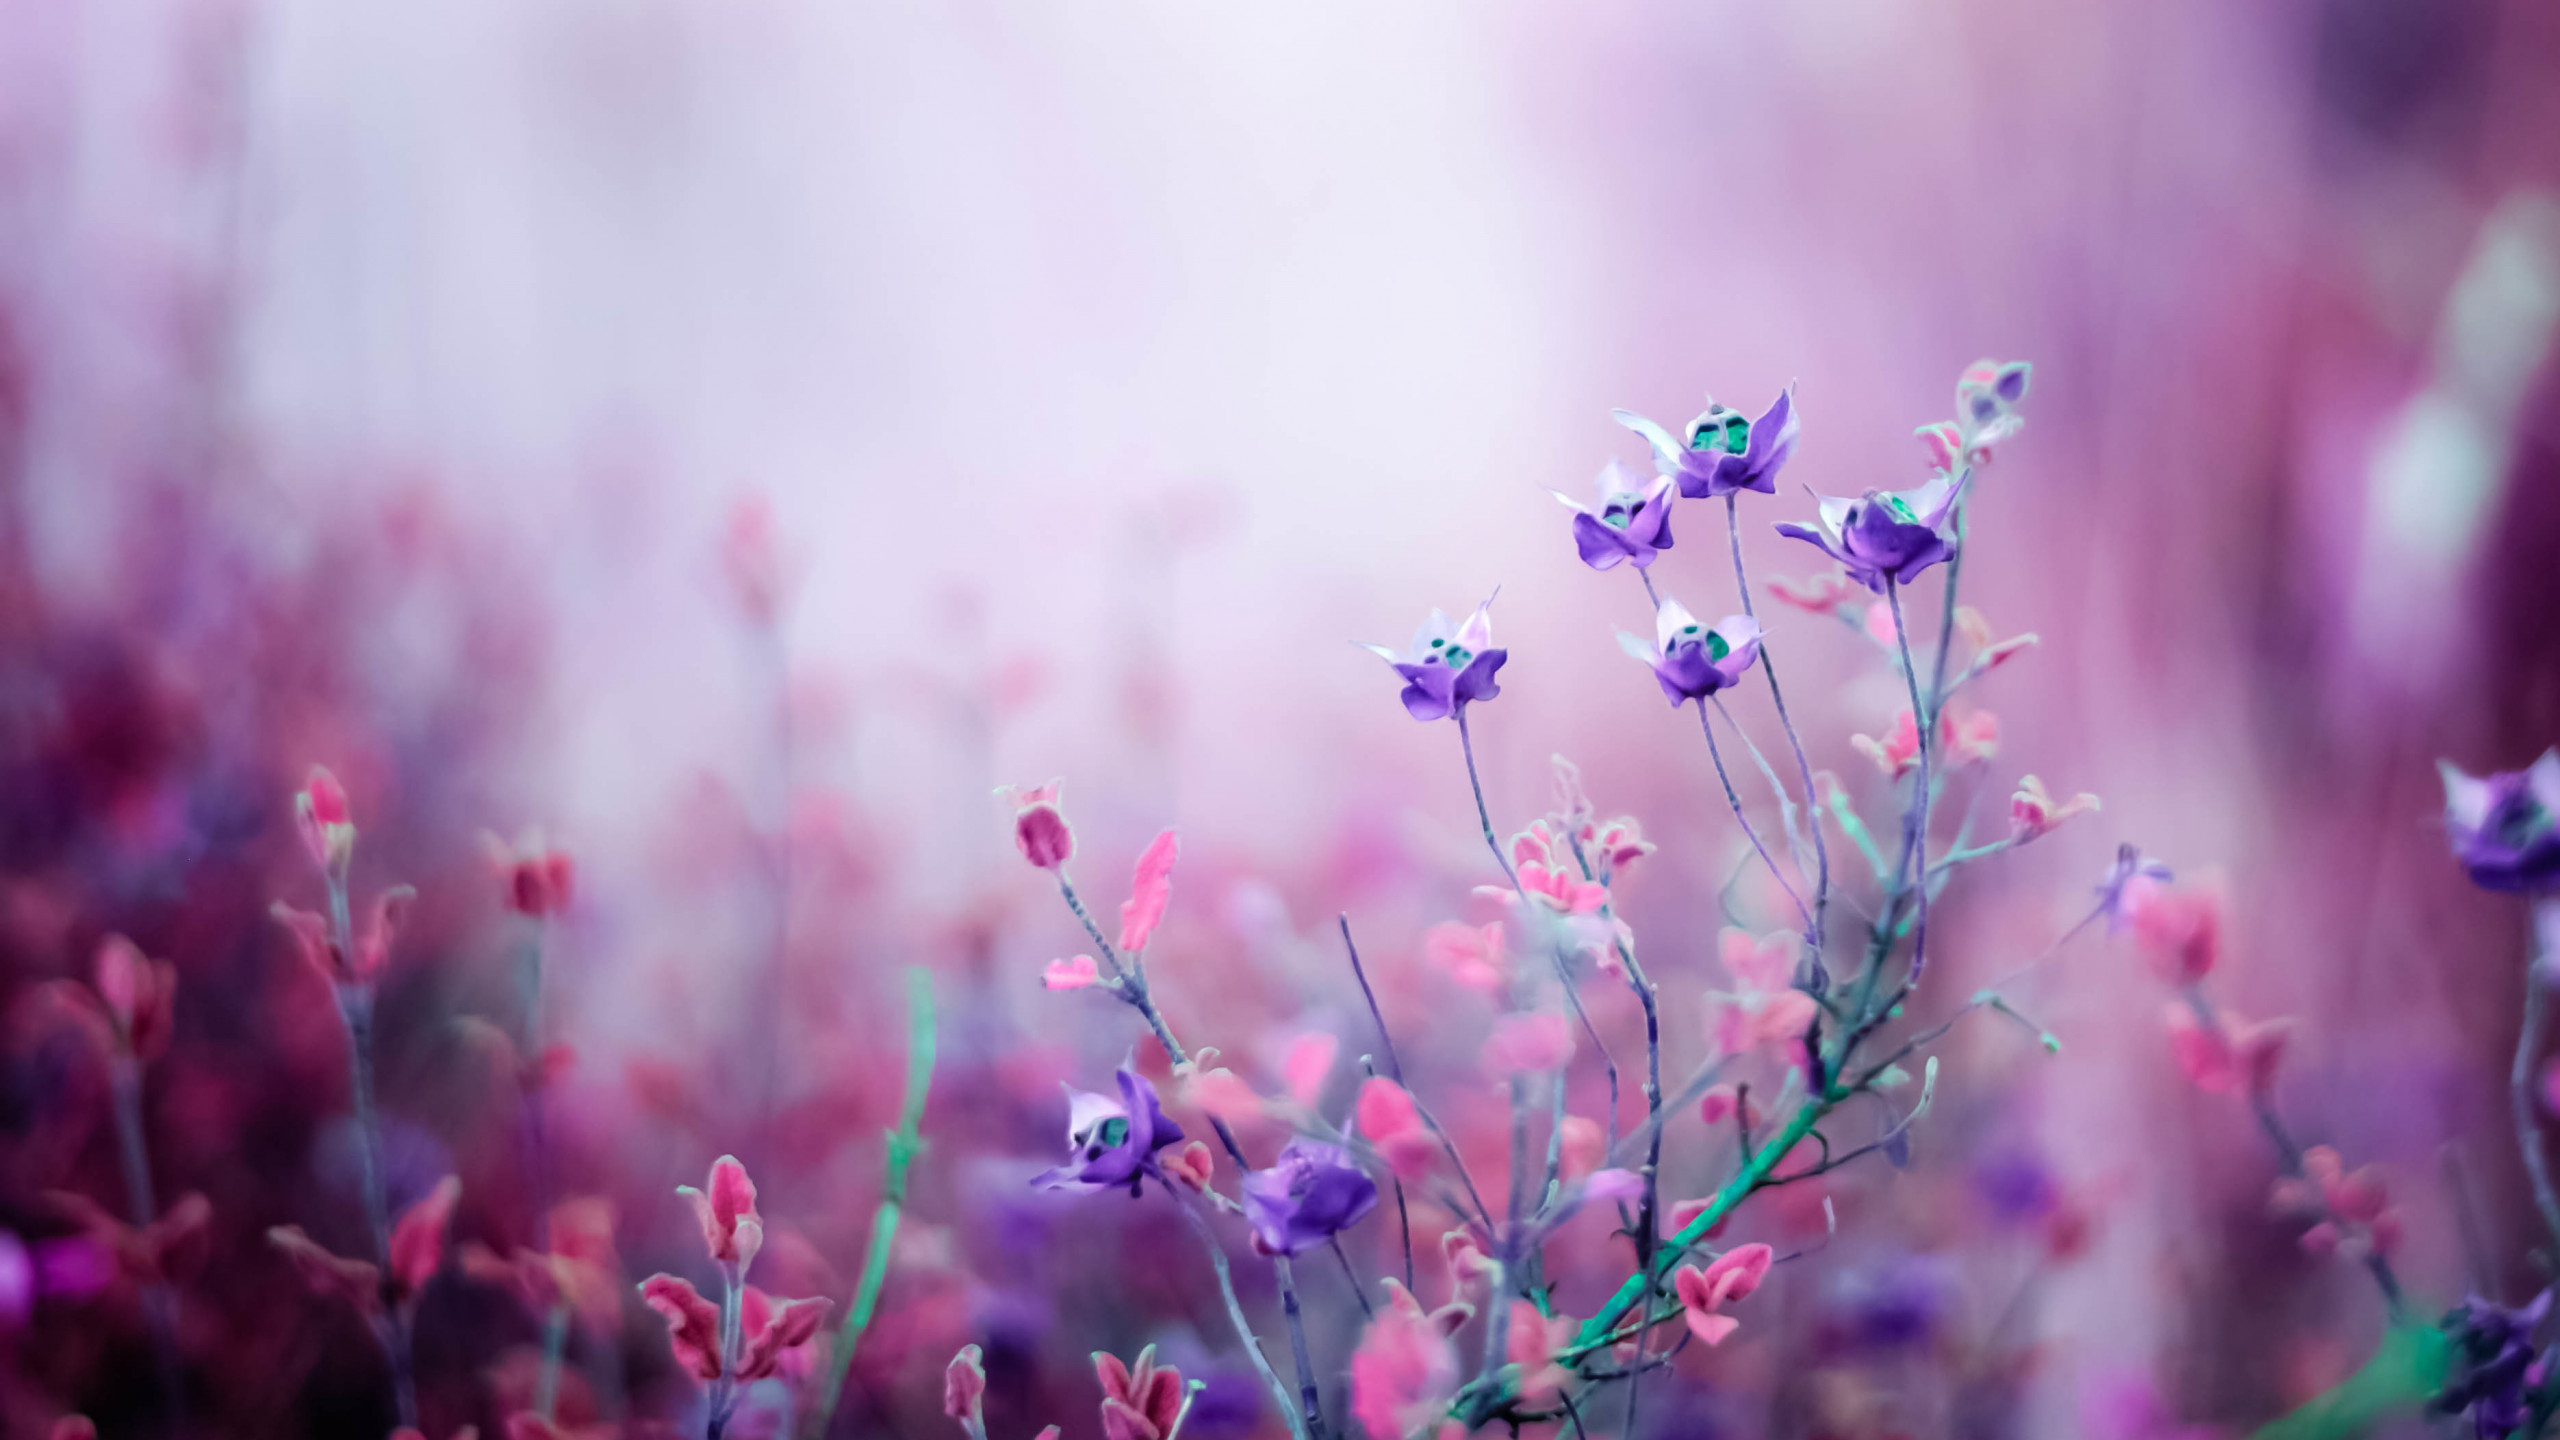 Spring flowers and butterflies in bubble 2K wallpaper download